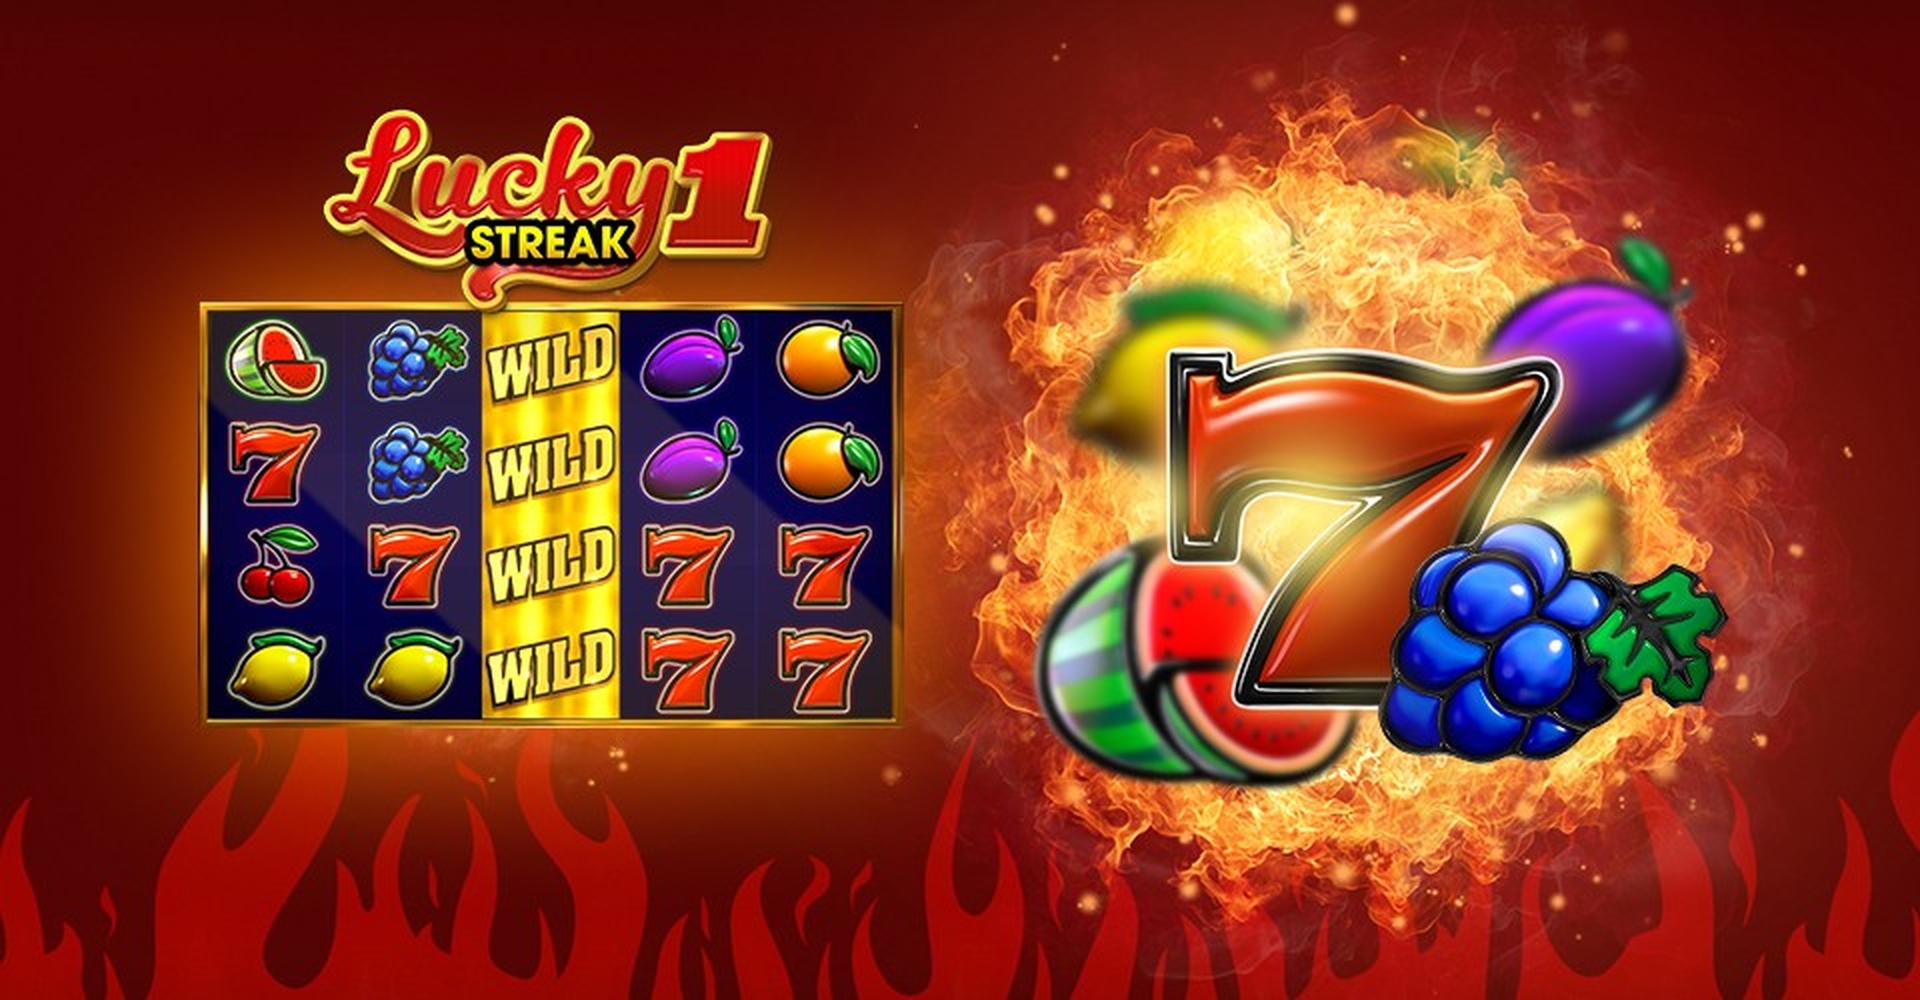 The Lucky streak 1 Online Slot Demo Game by Endorphina